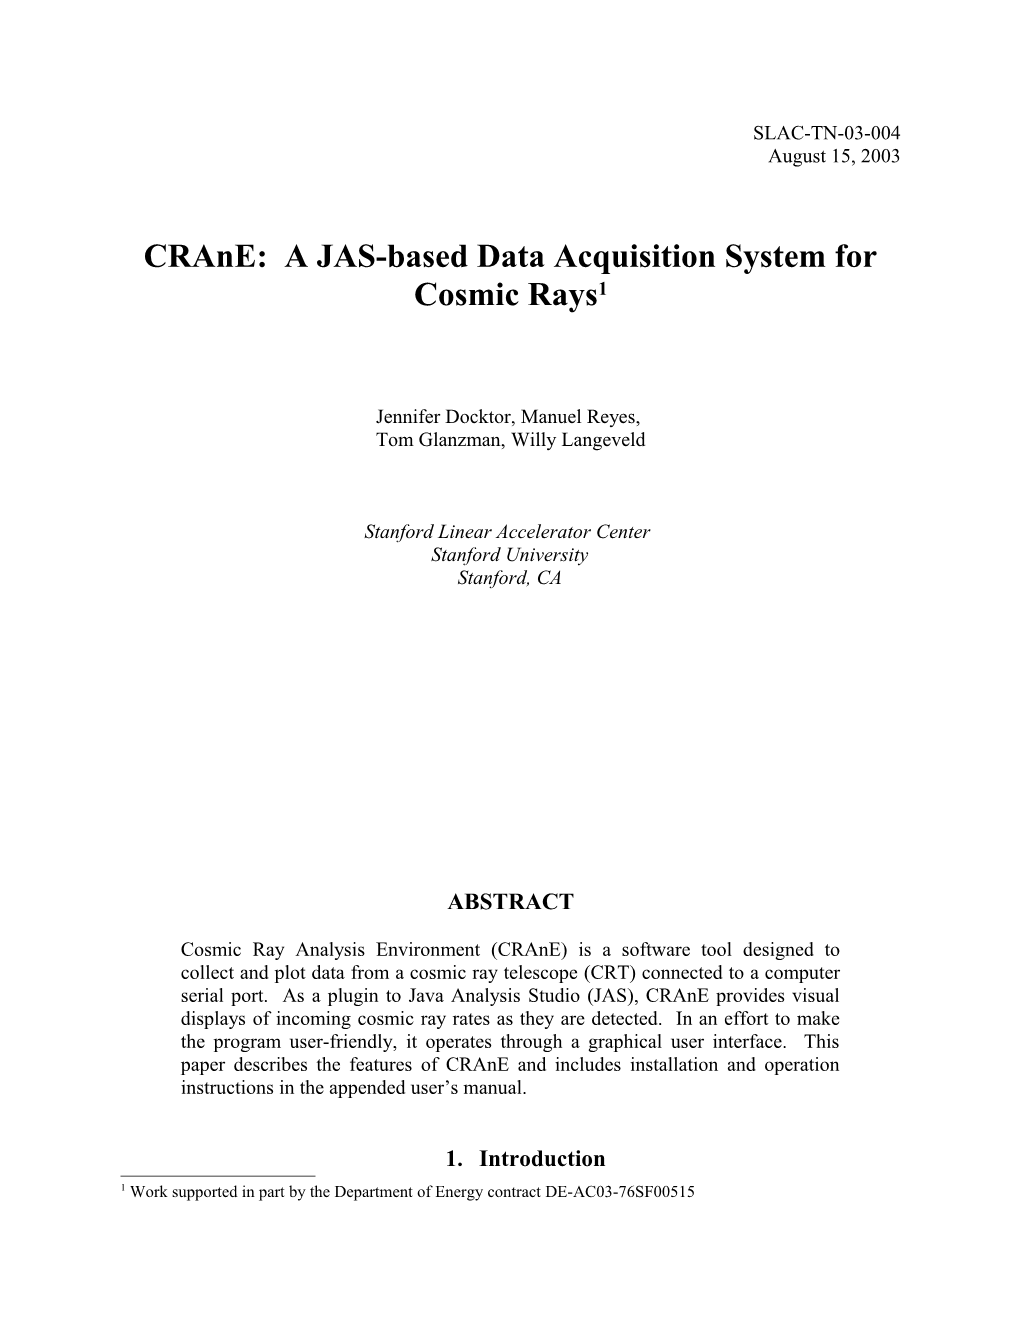 Crane: a JAS-Based Data Acquisition System for Cosmic Rays 1